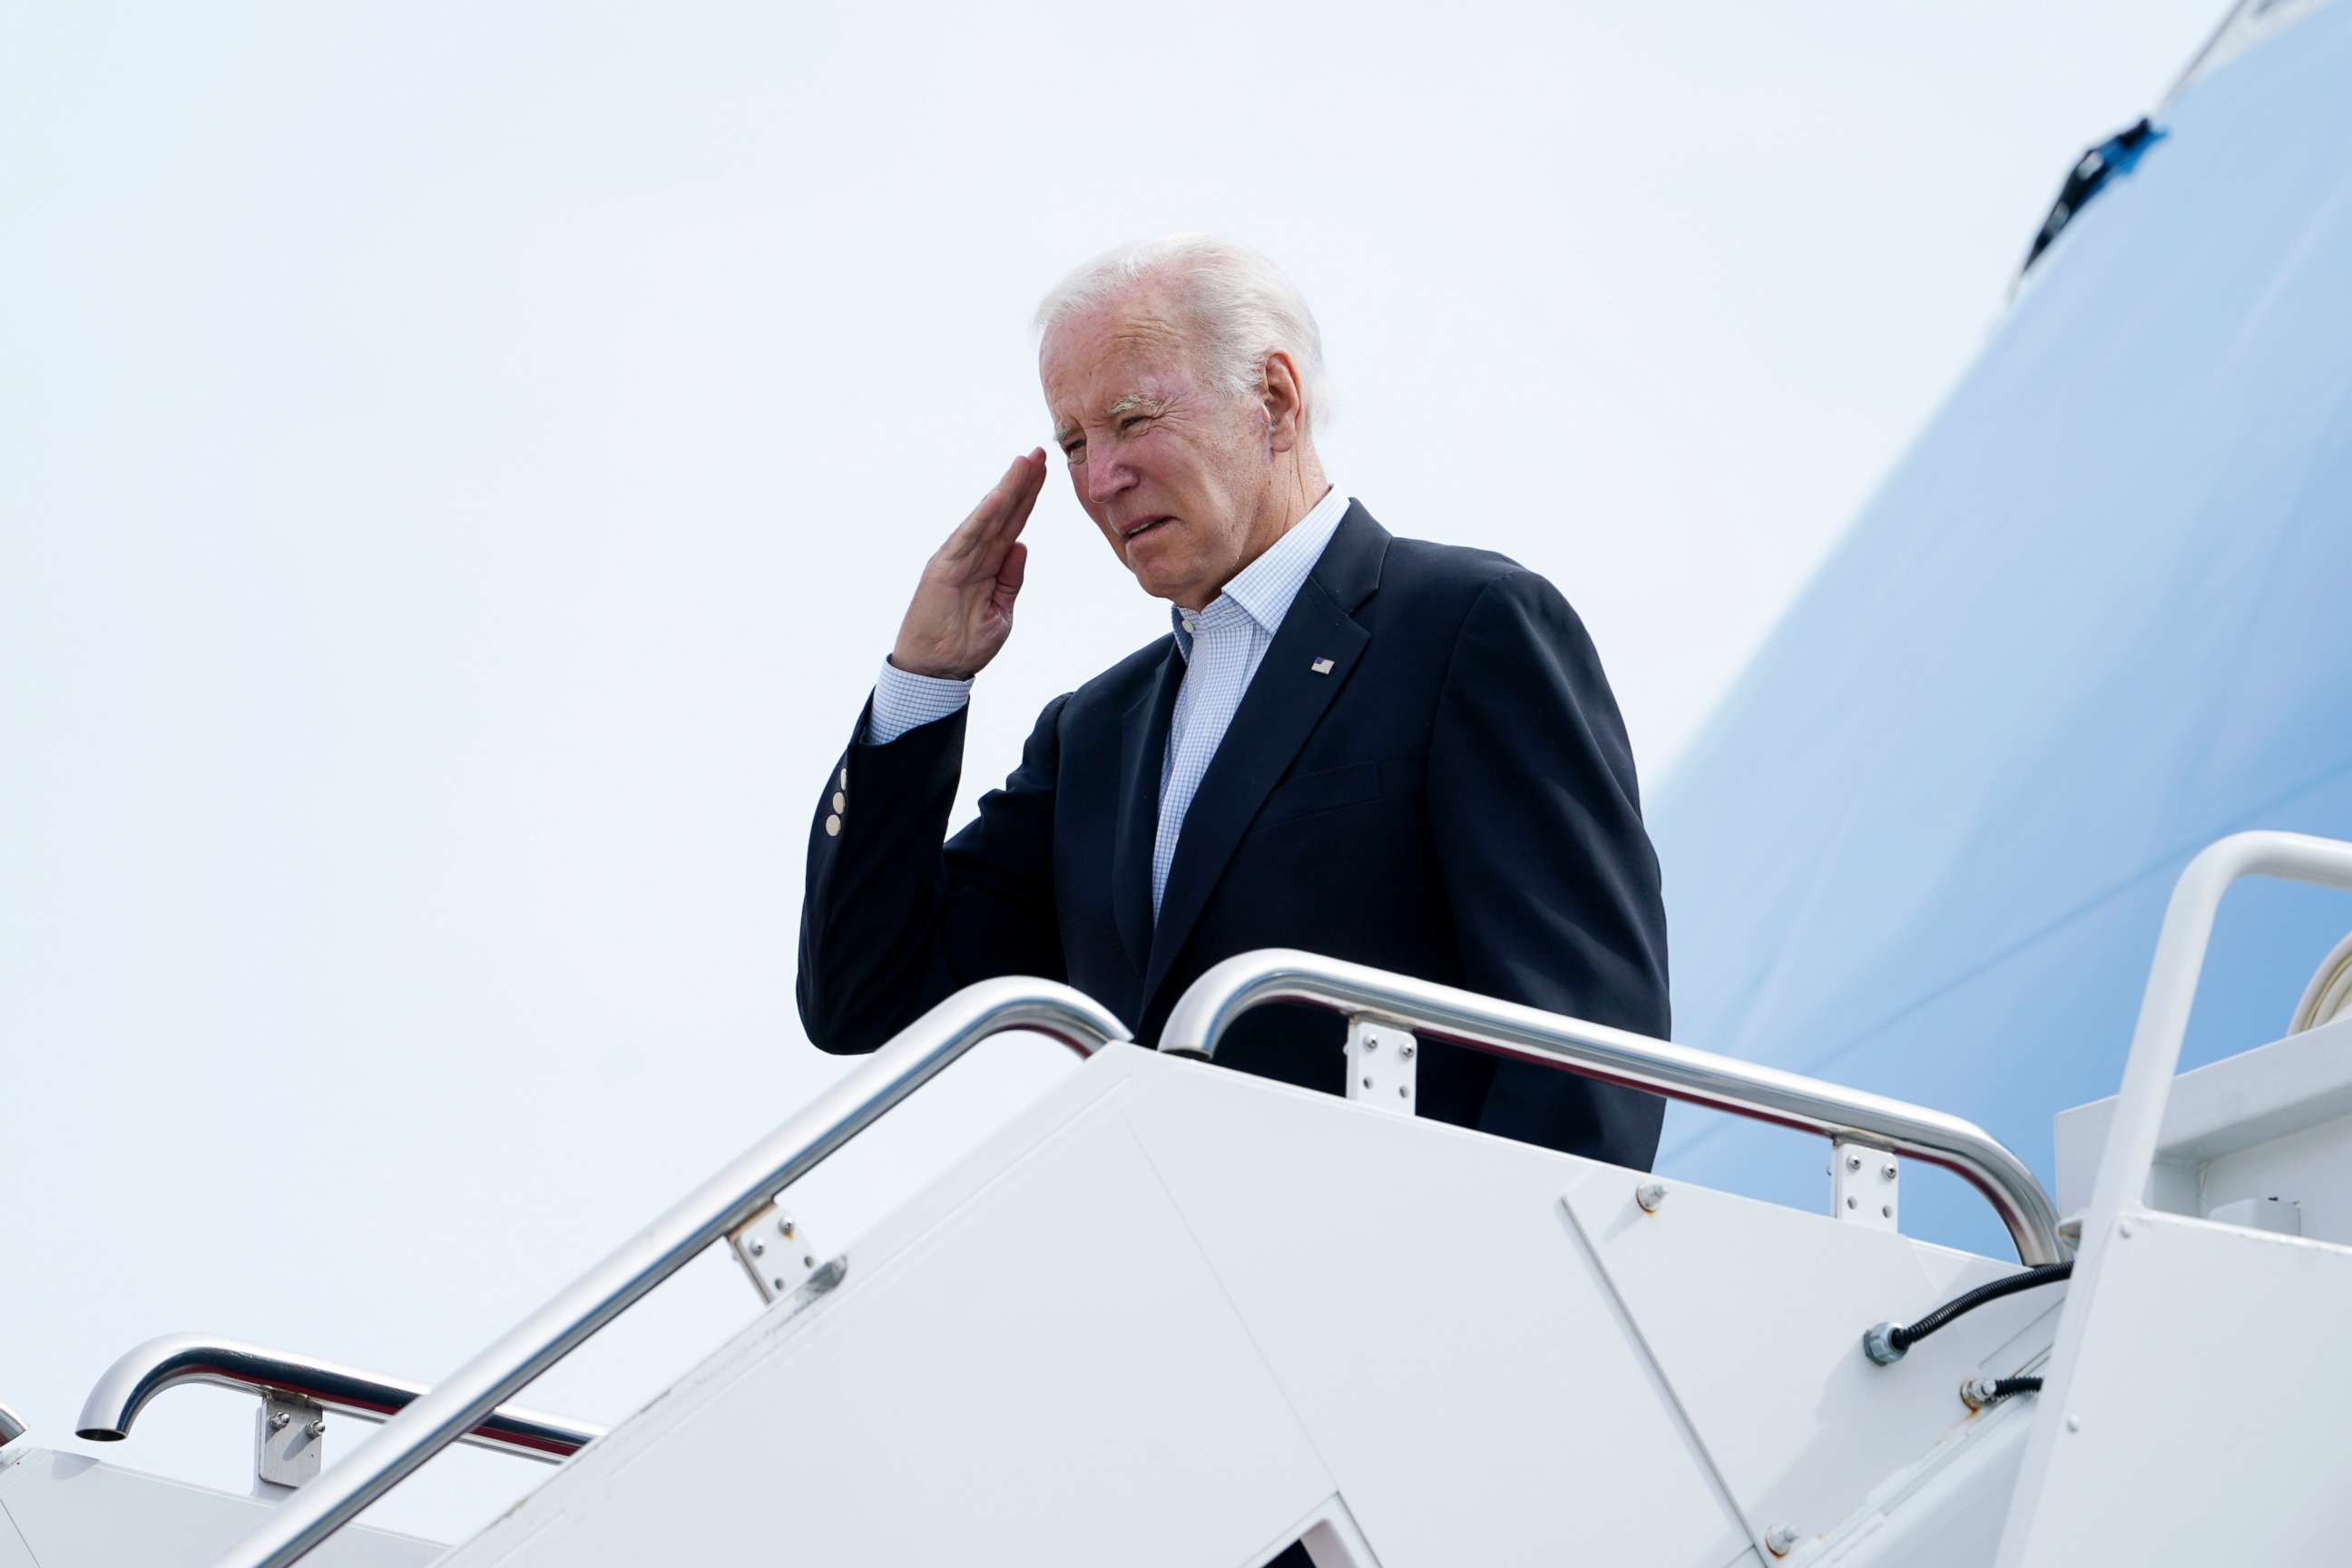 PHOTO: President Joe Biden salutes as he boards Air Force One at Andrews Air Force Base, Md., Sept. 5, 2022.